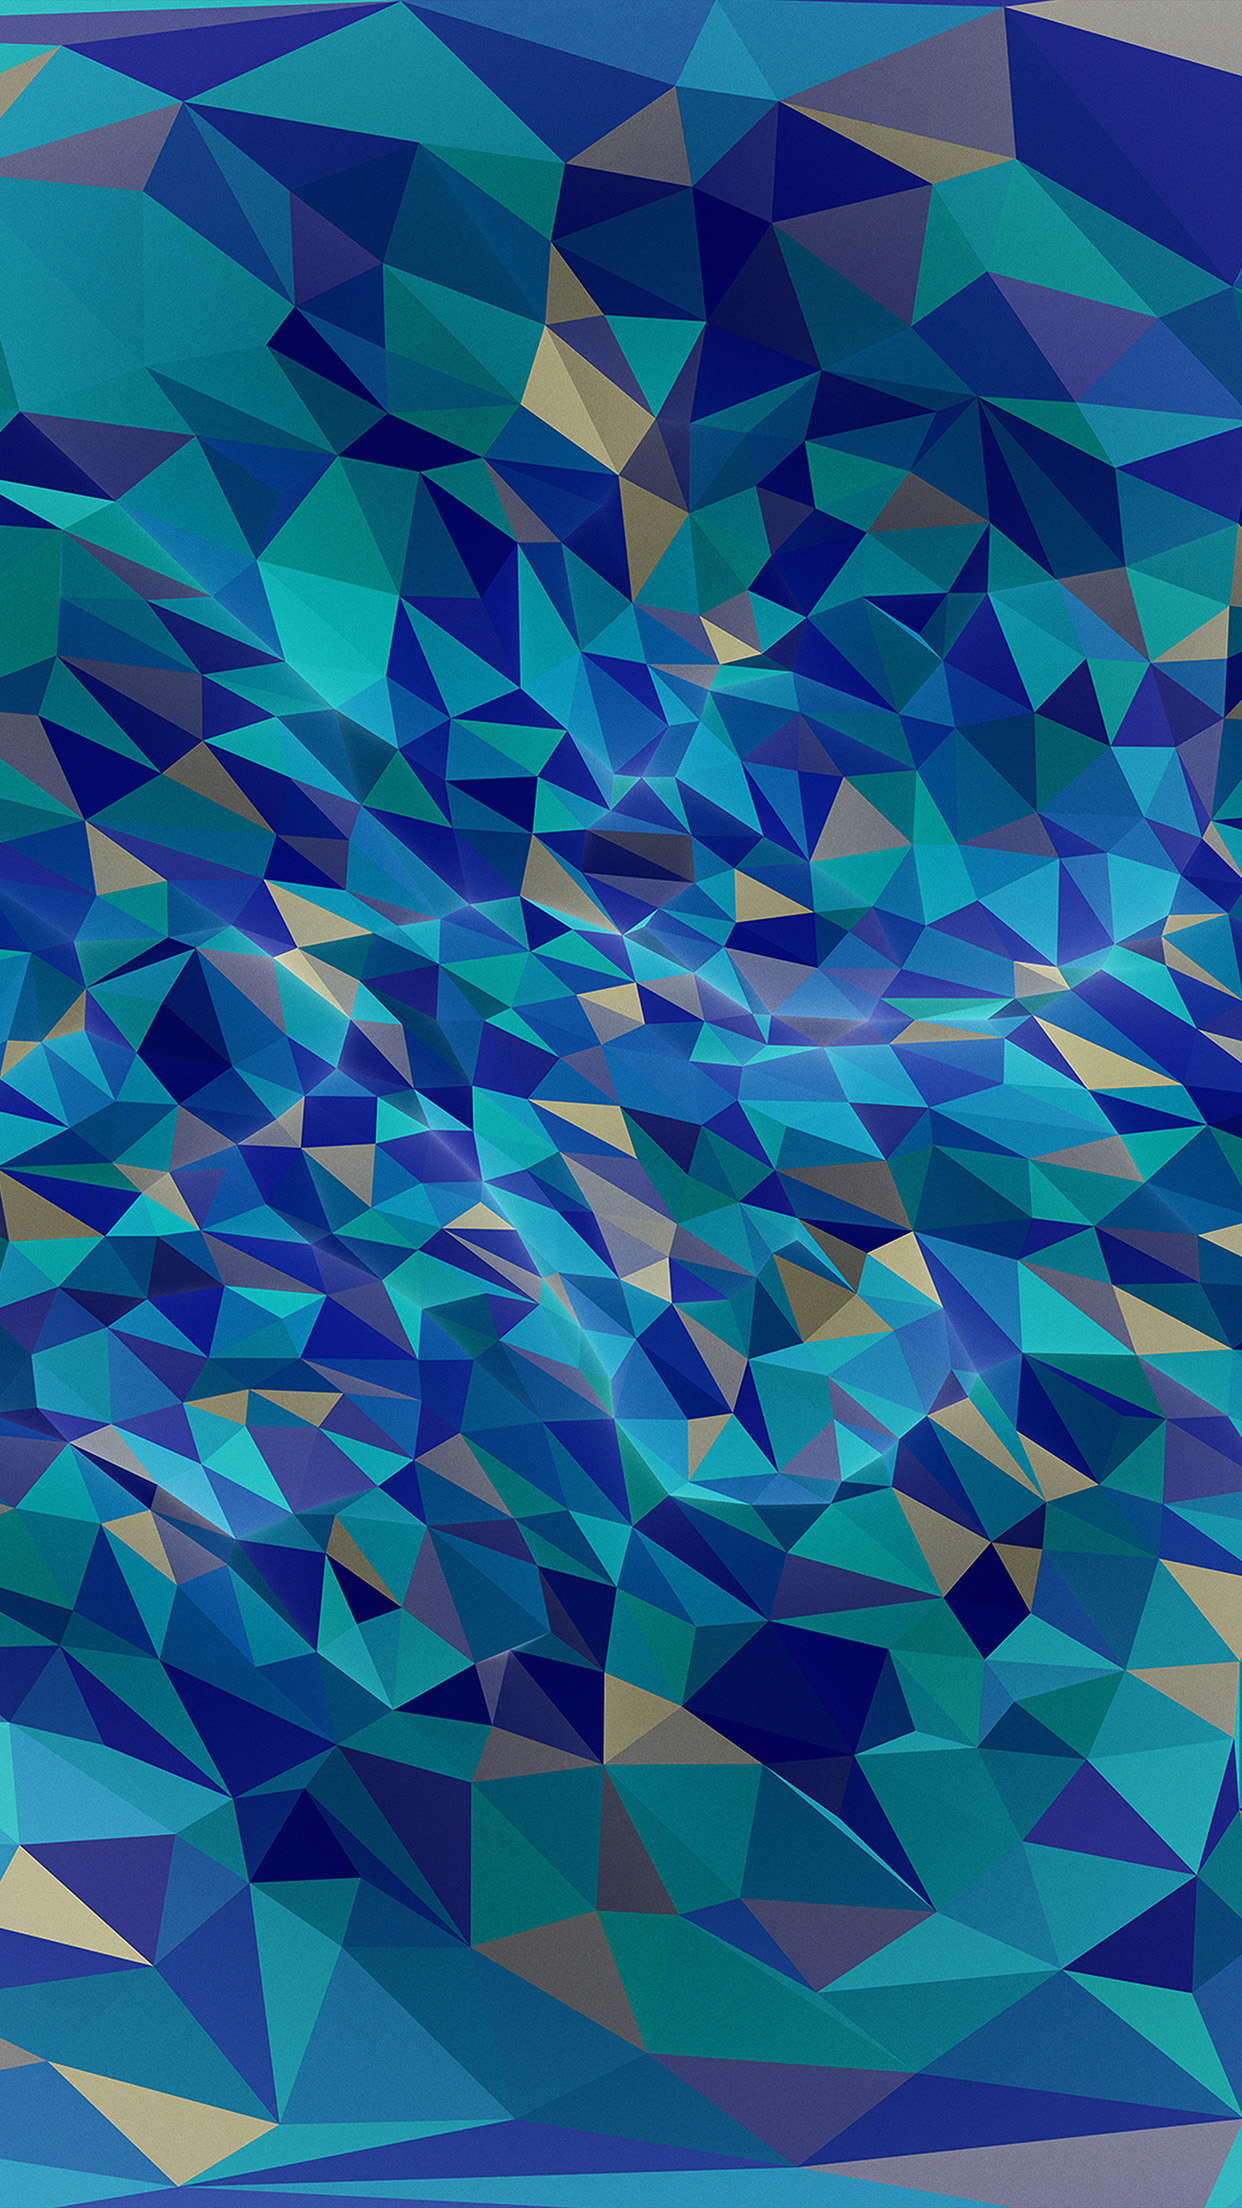 Wallpapers of the week: geometric patterns